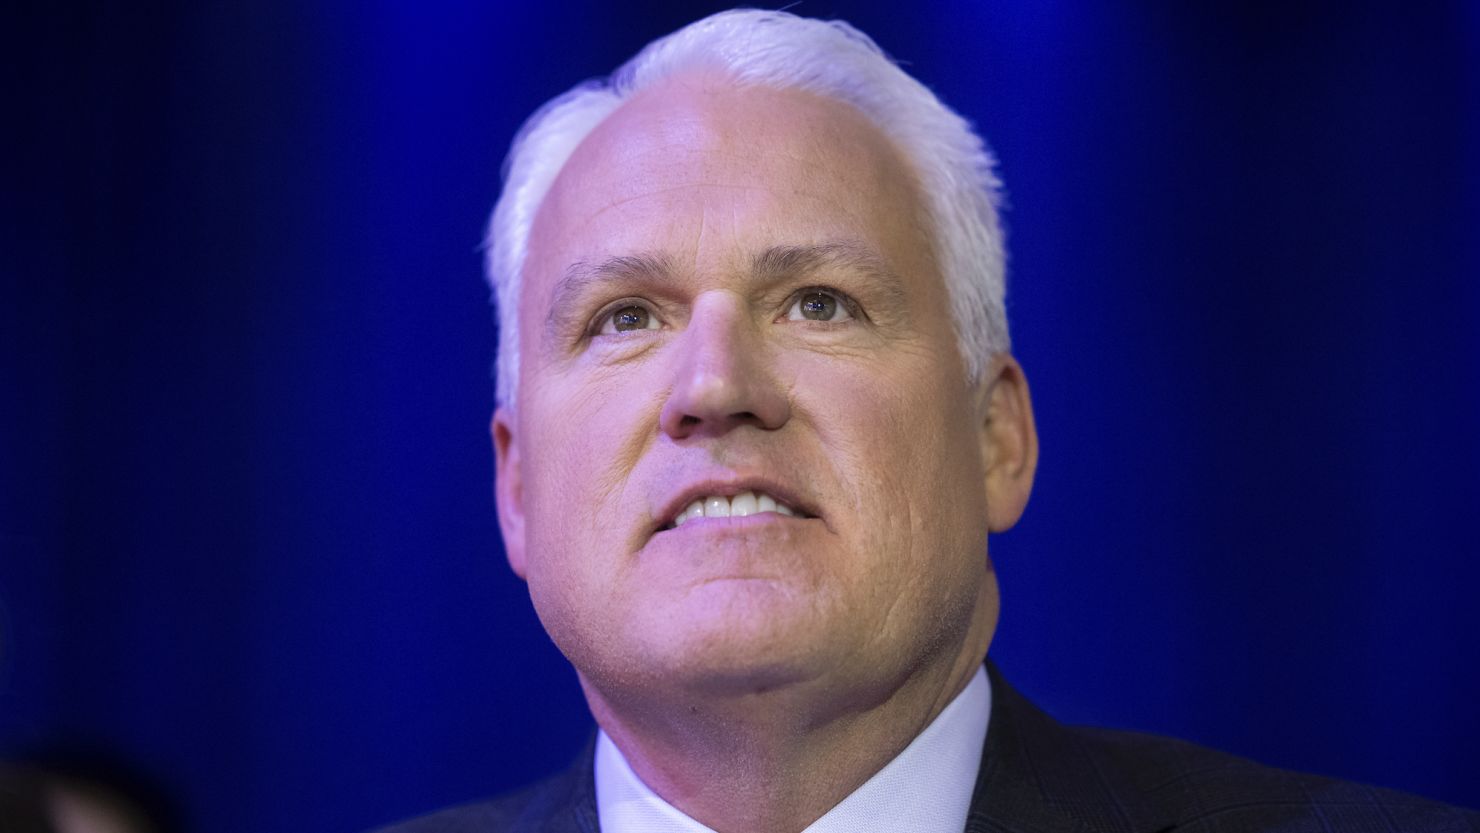 Conservative Political Action Conference Chair Matt Schlapp looks on during a speech during CPAC at the Gaylord National Resort and Convention Center in National Harbor, Md., March 3, 2023. (Francis Chung/POLITICO via AP Images)